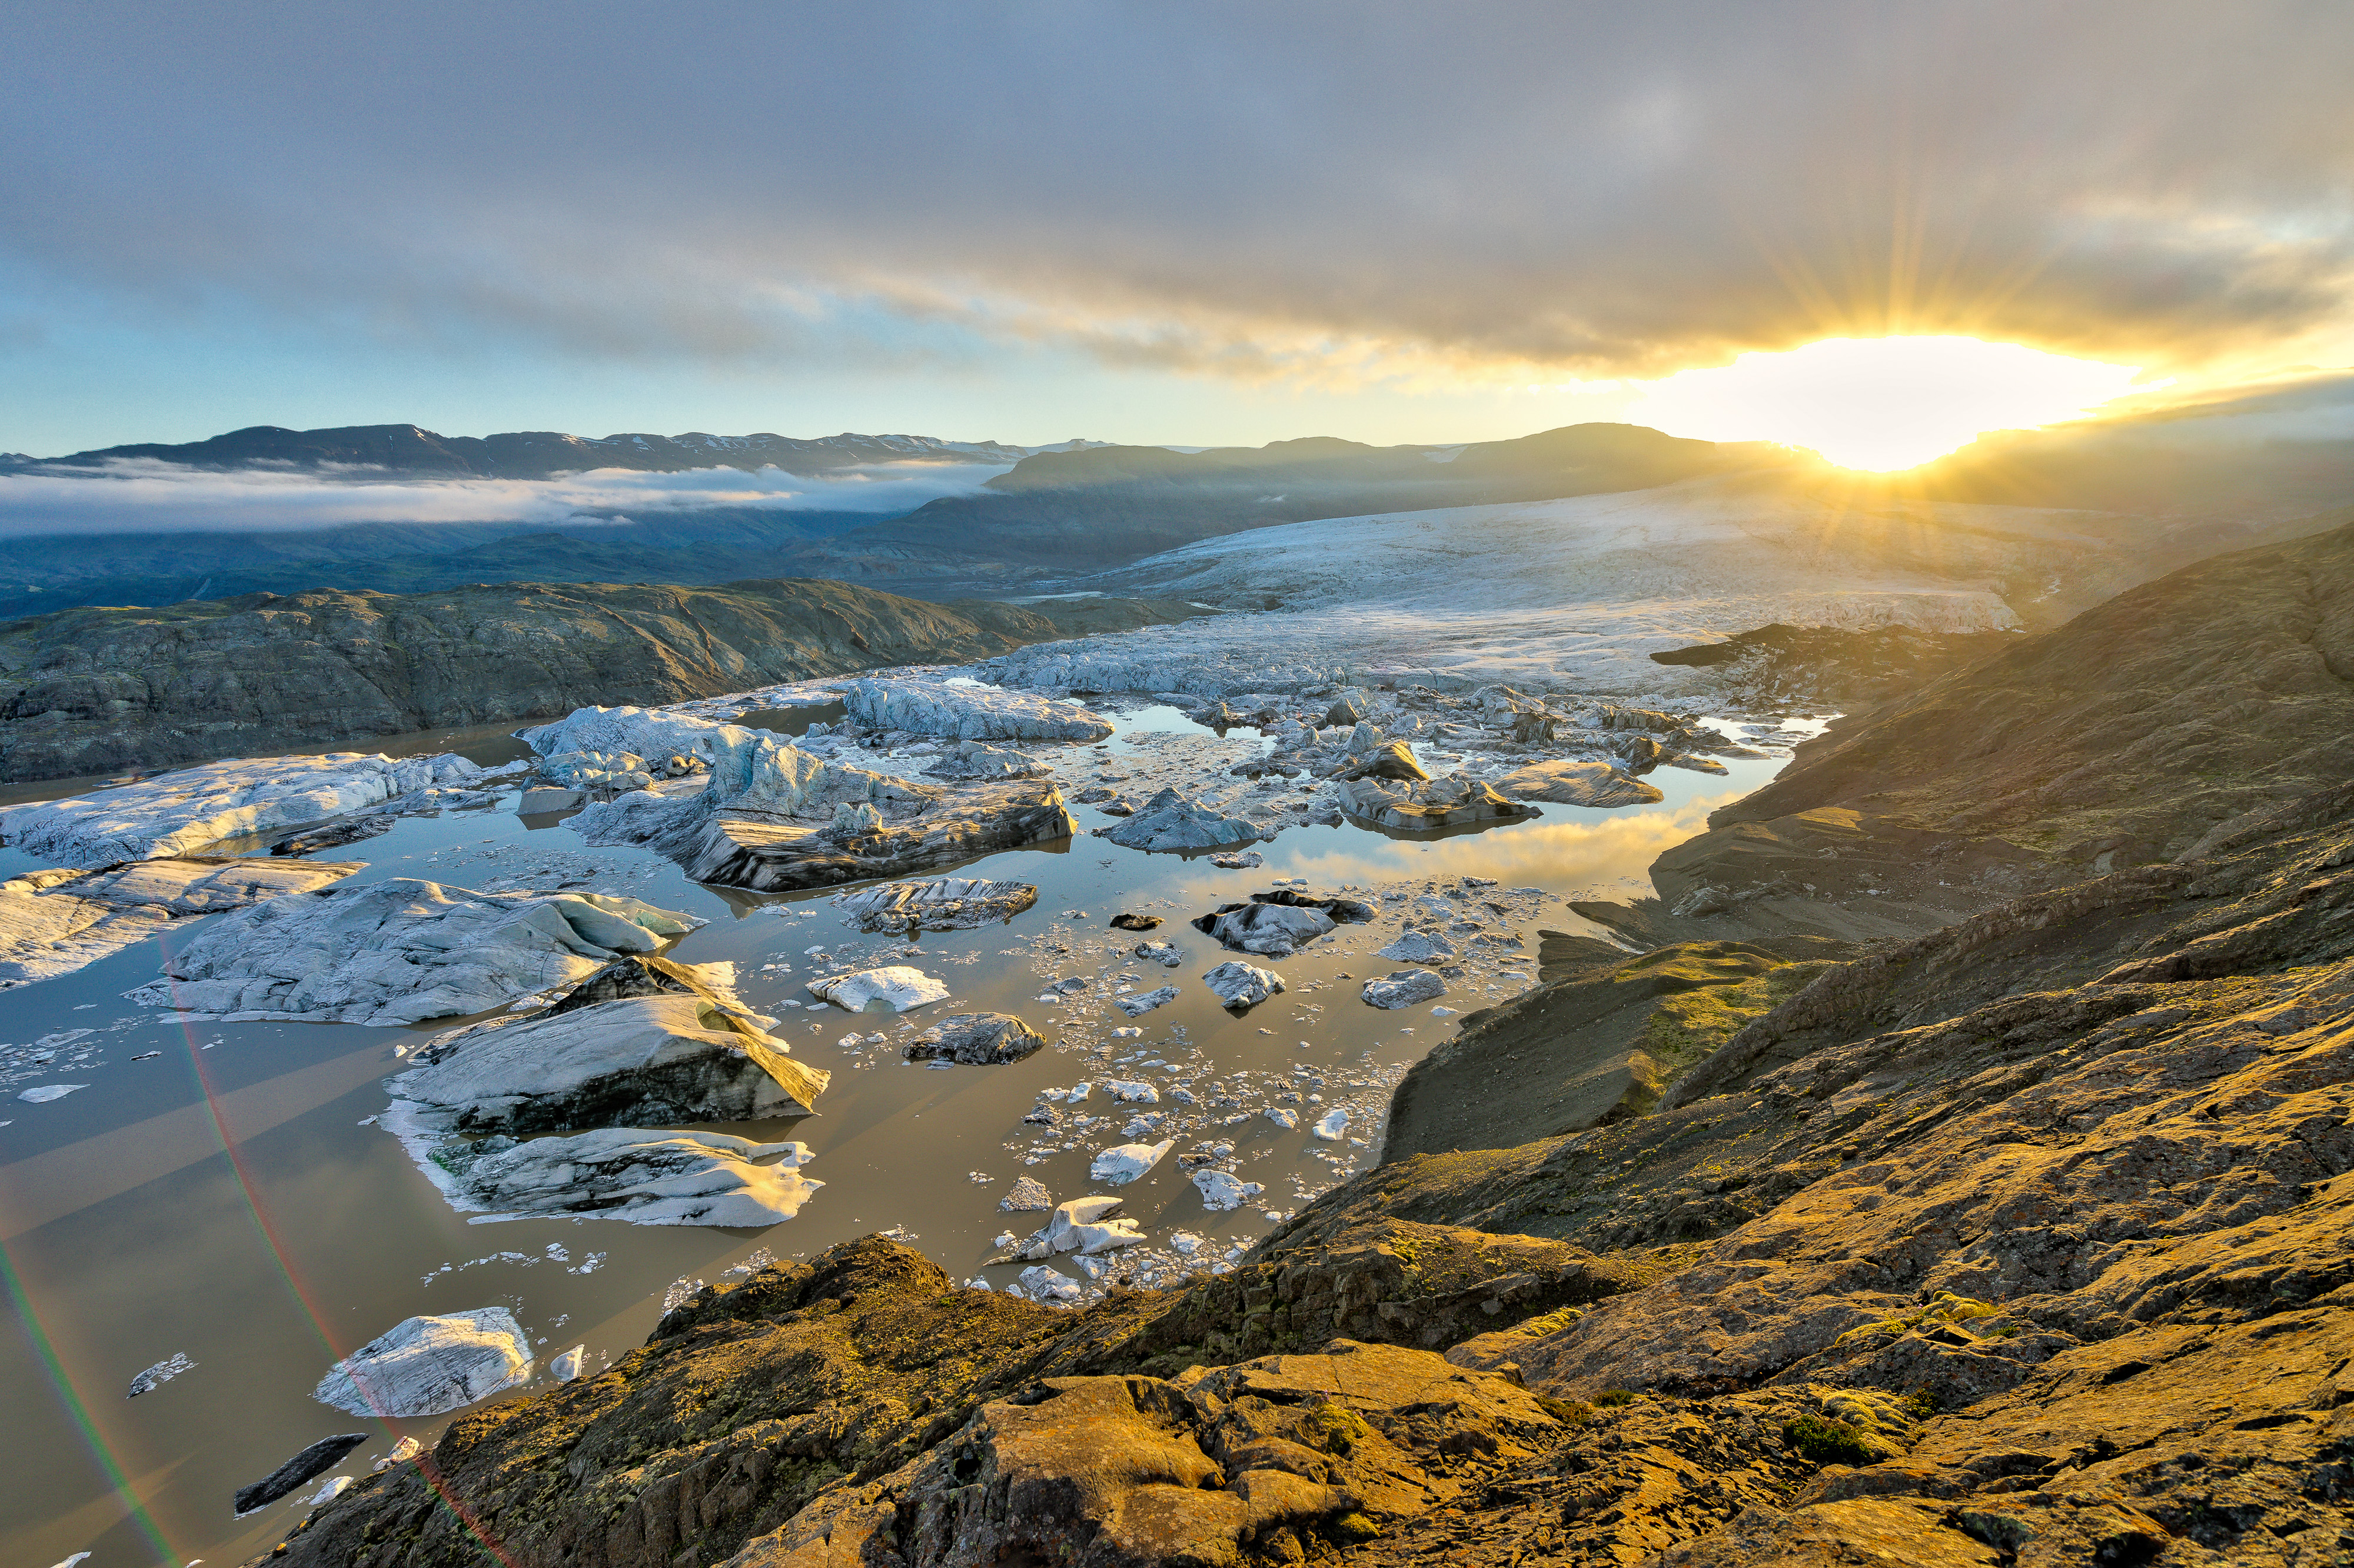 A glacier lake with floating icebergs in front of a river of ice in a sunset atmosphere